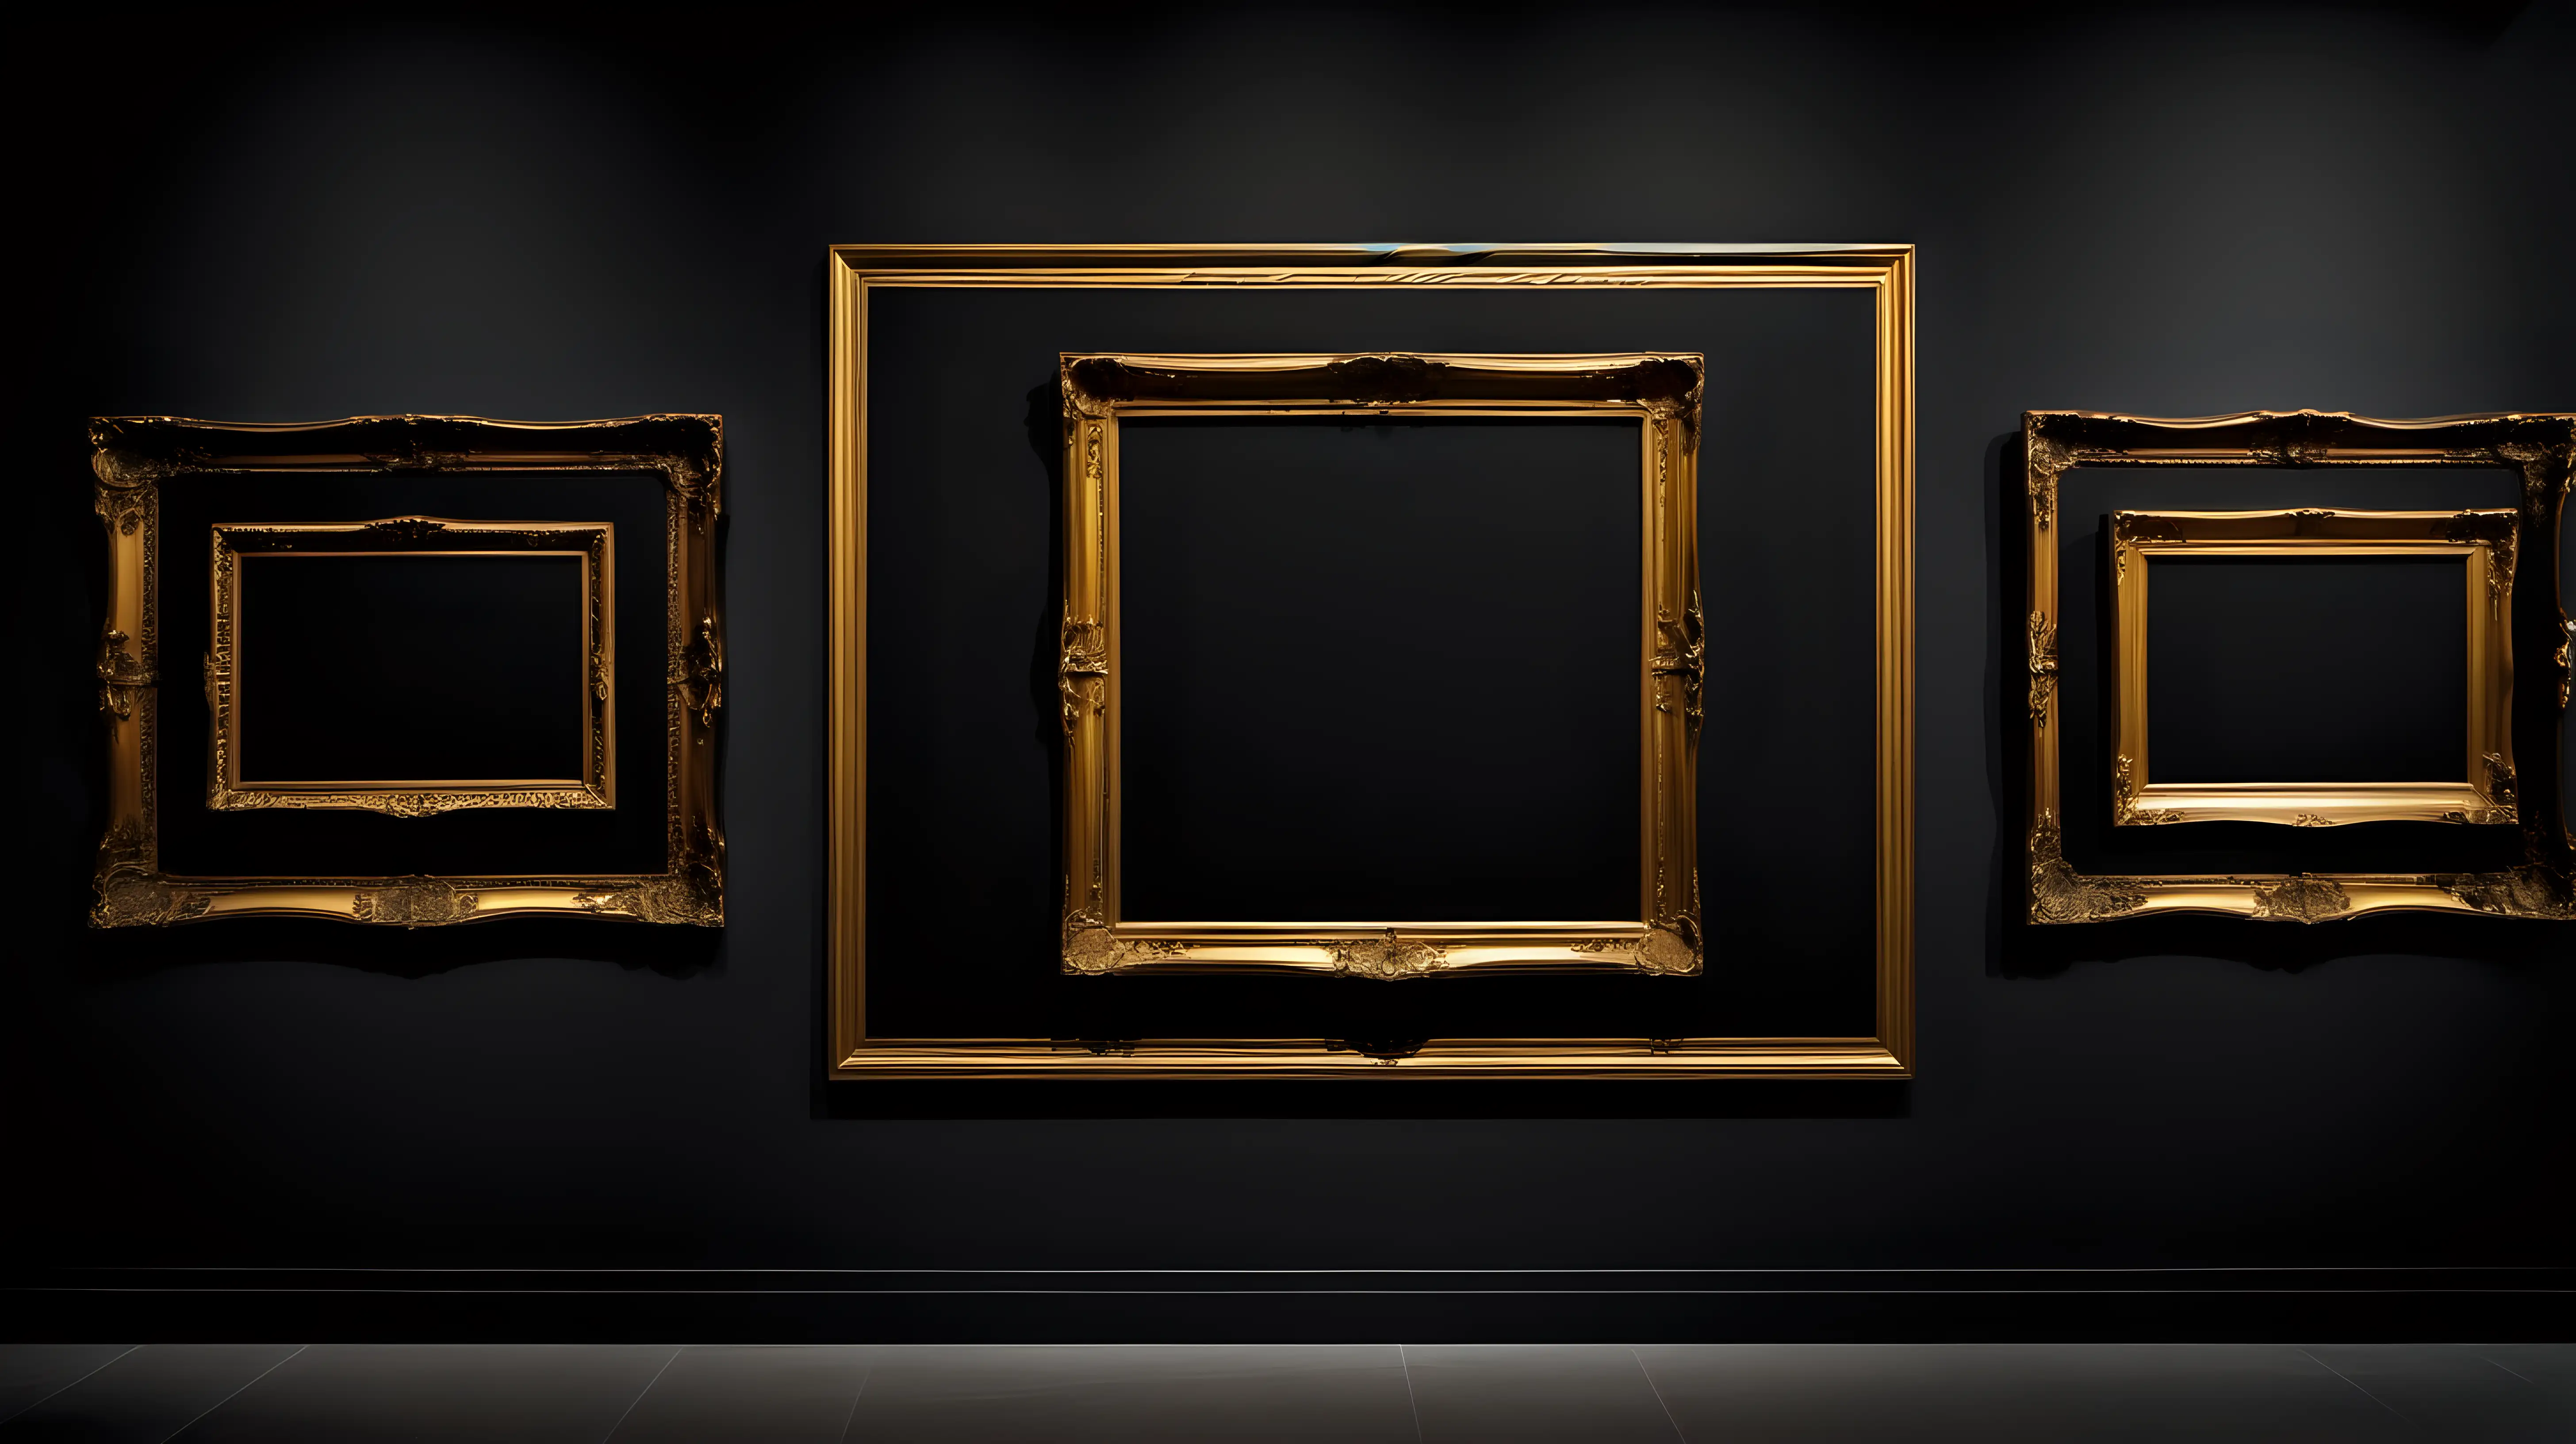 Dark Art Museum Wall with Three Solid Black Paintings in Gold Frames